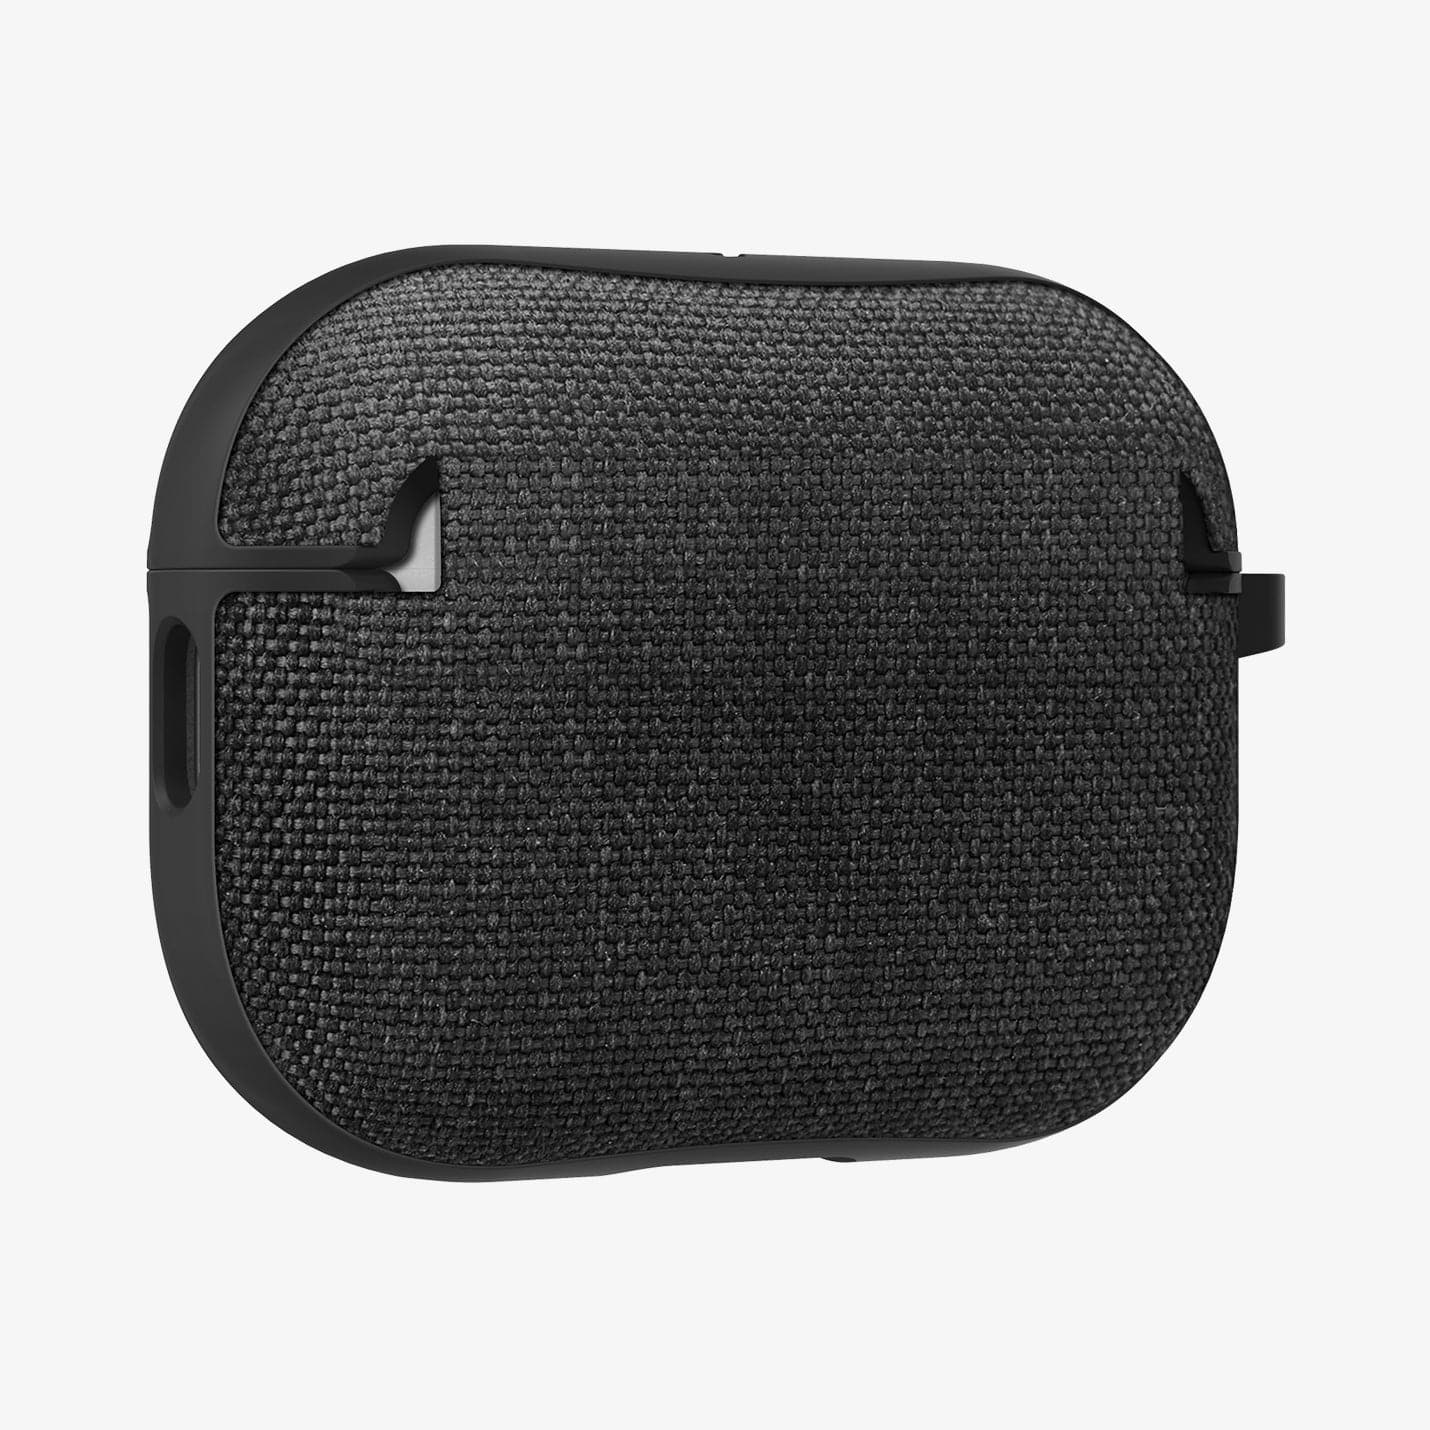 ACS05483 - Apple AirPods Pro 2 Case Urban Fit in black showing the back and side